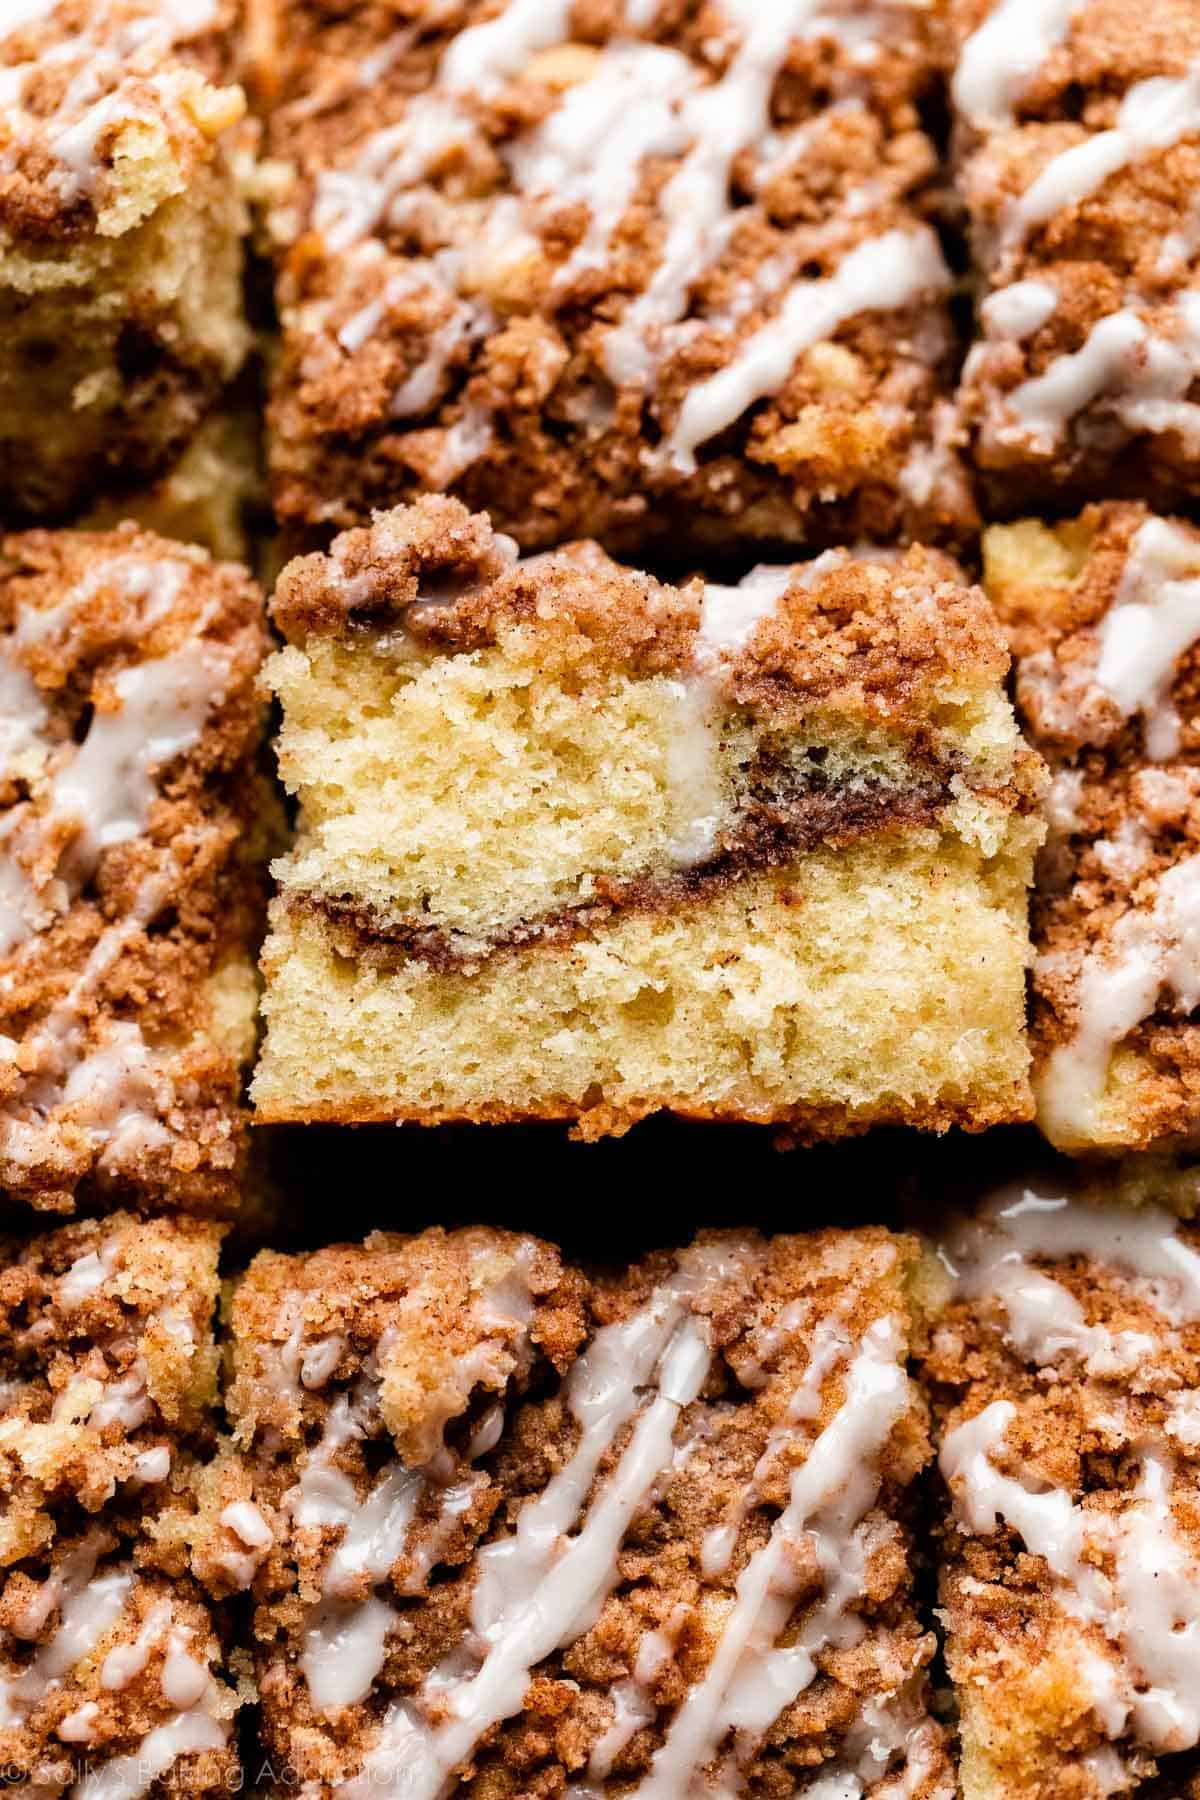 up close photo showing cinnamon coffee cake with 1 slide turned on side to see ribbon of cinnamon swirl inside.